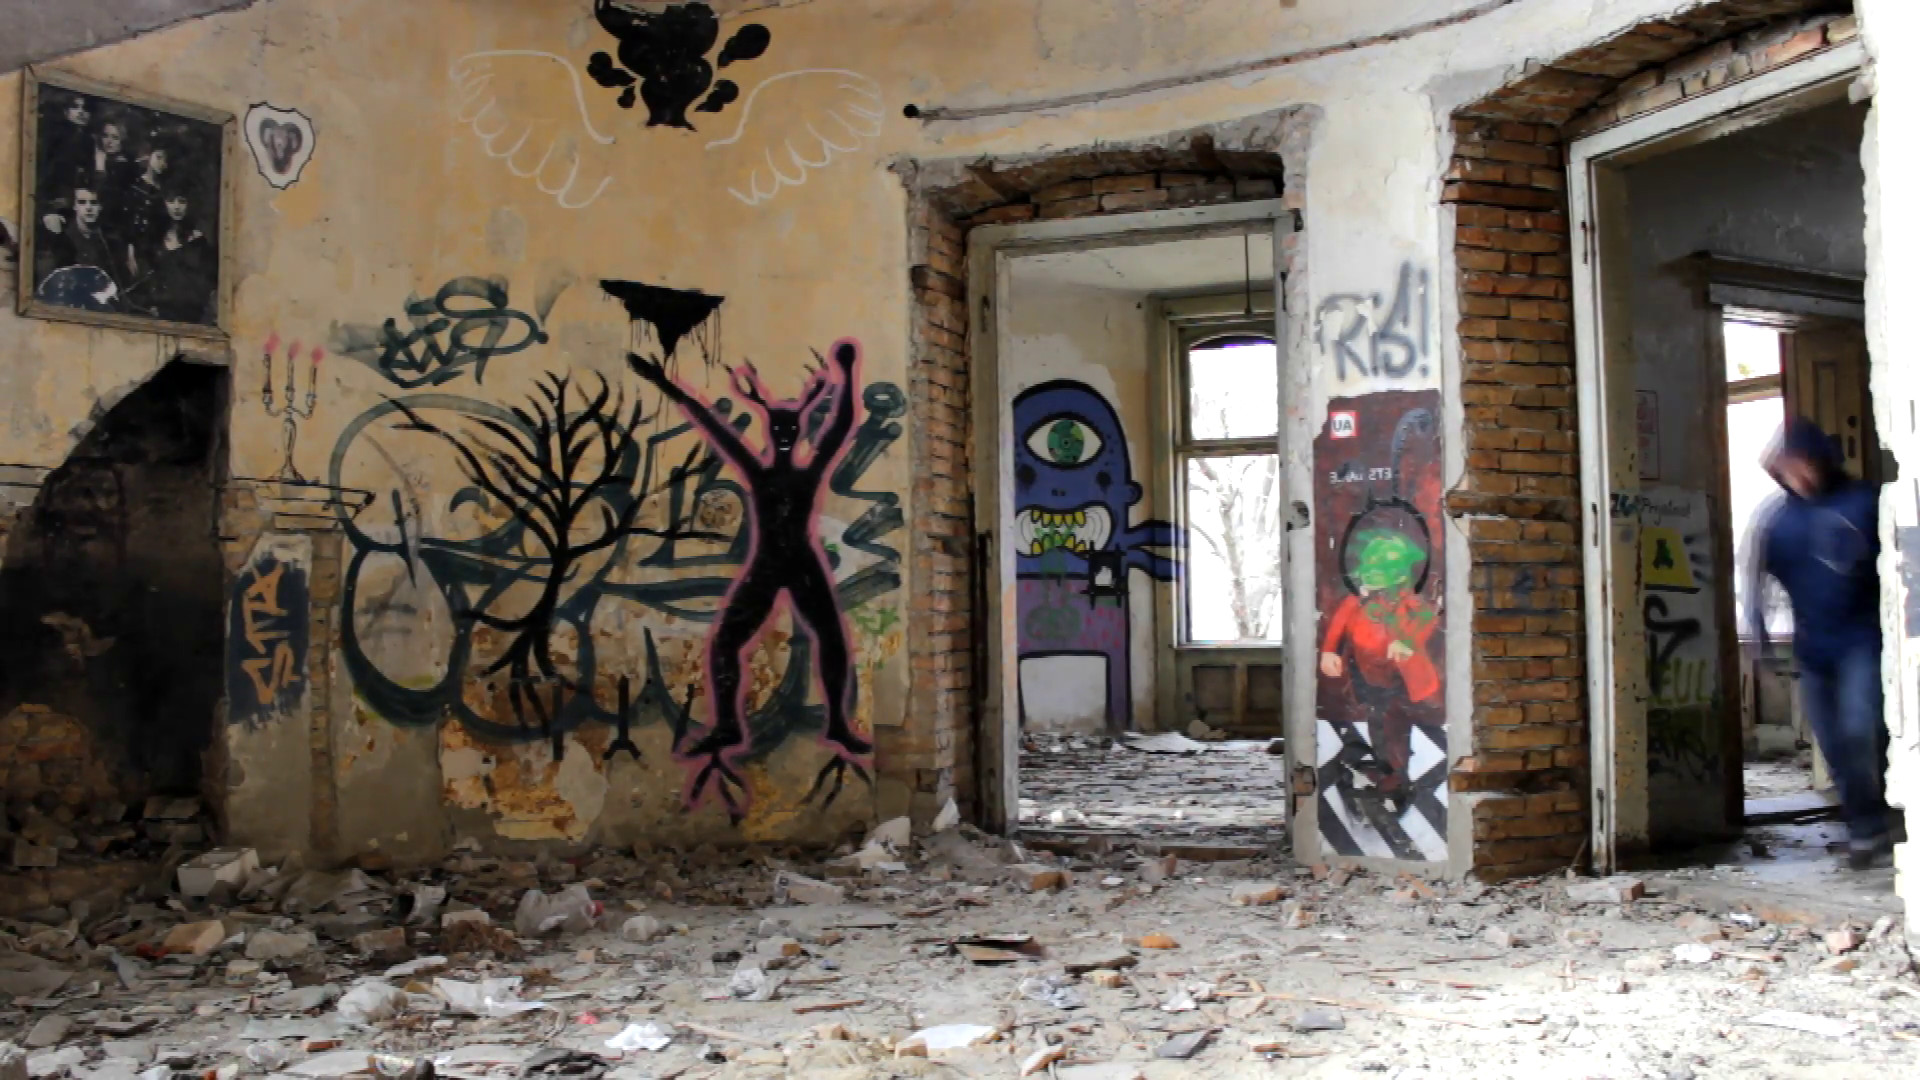 1920x1080 Subscription Library ghost House ghetto house with a graffiti and bum